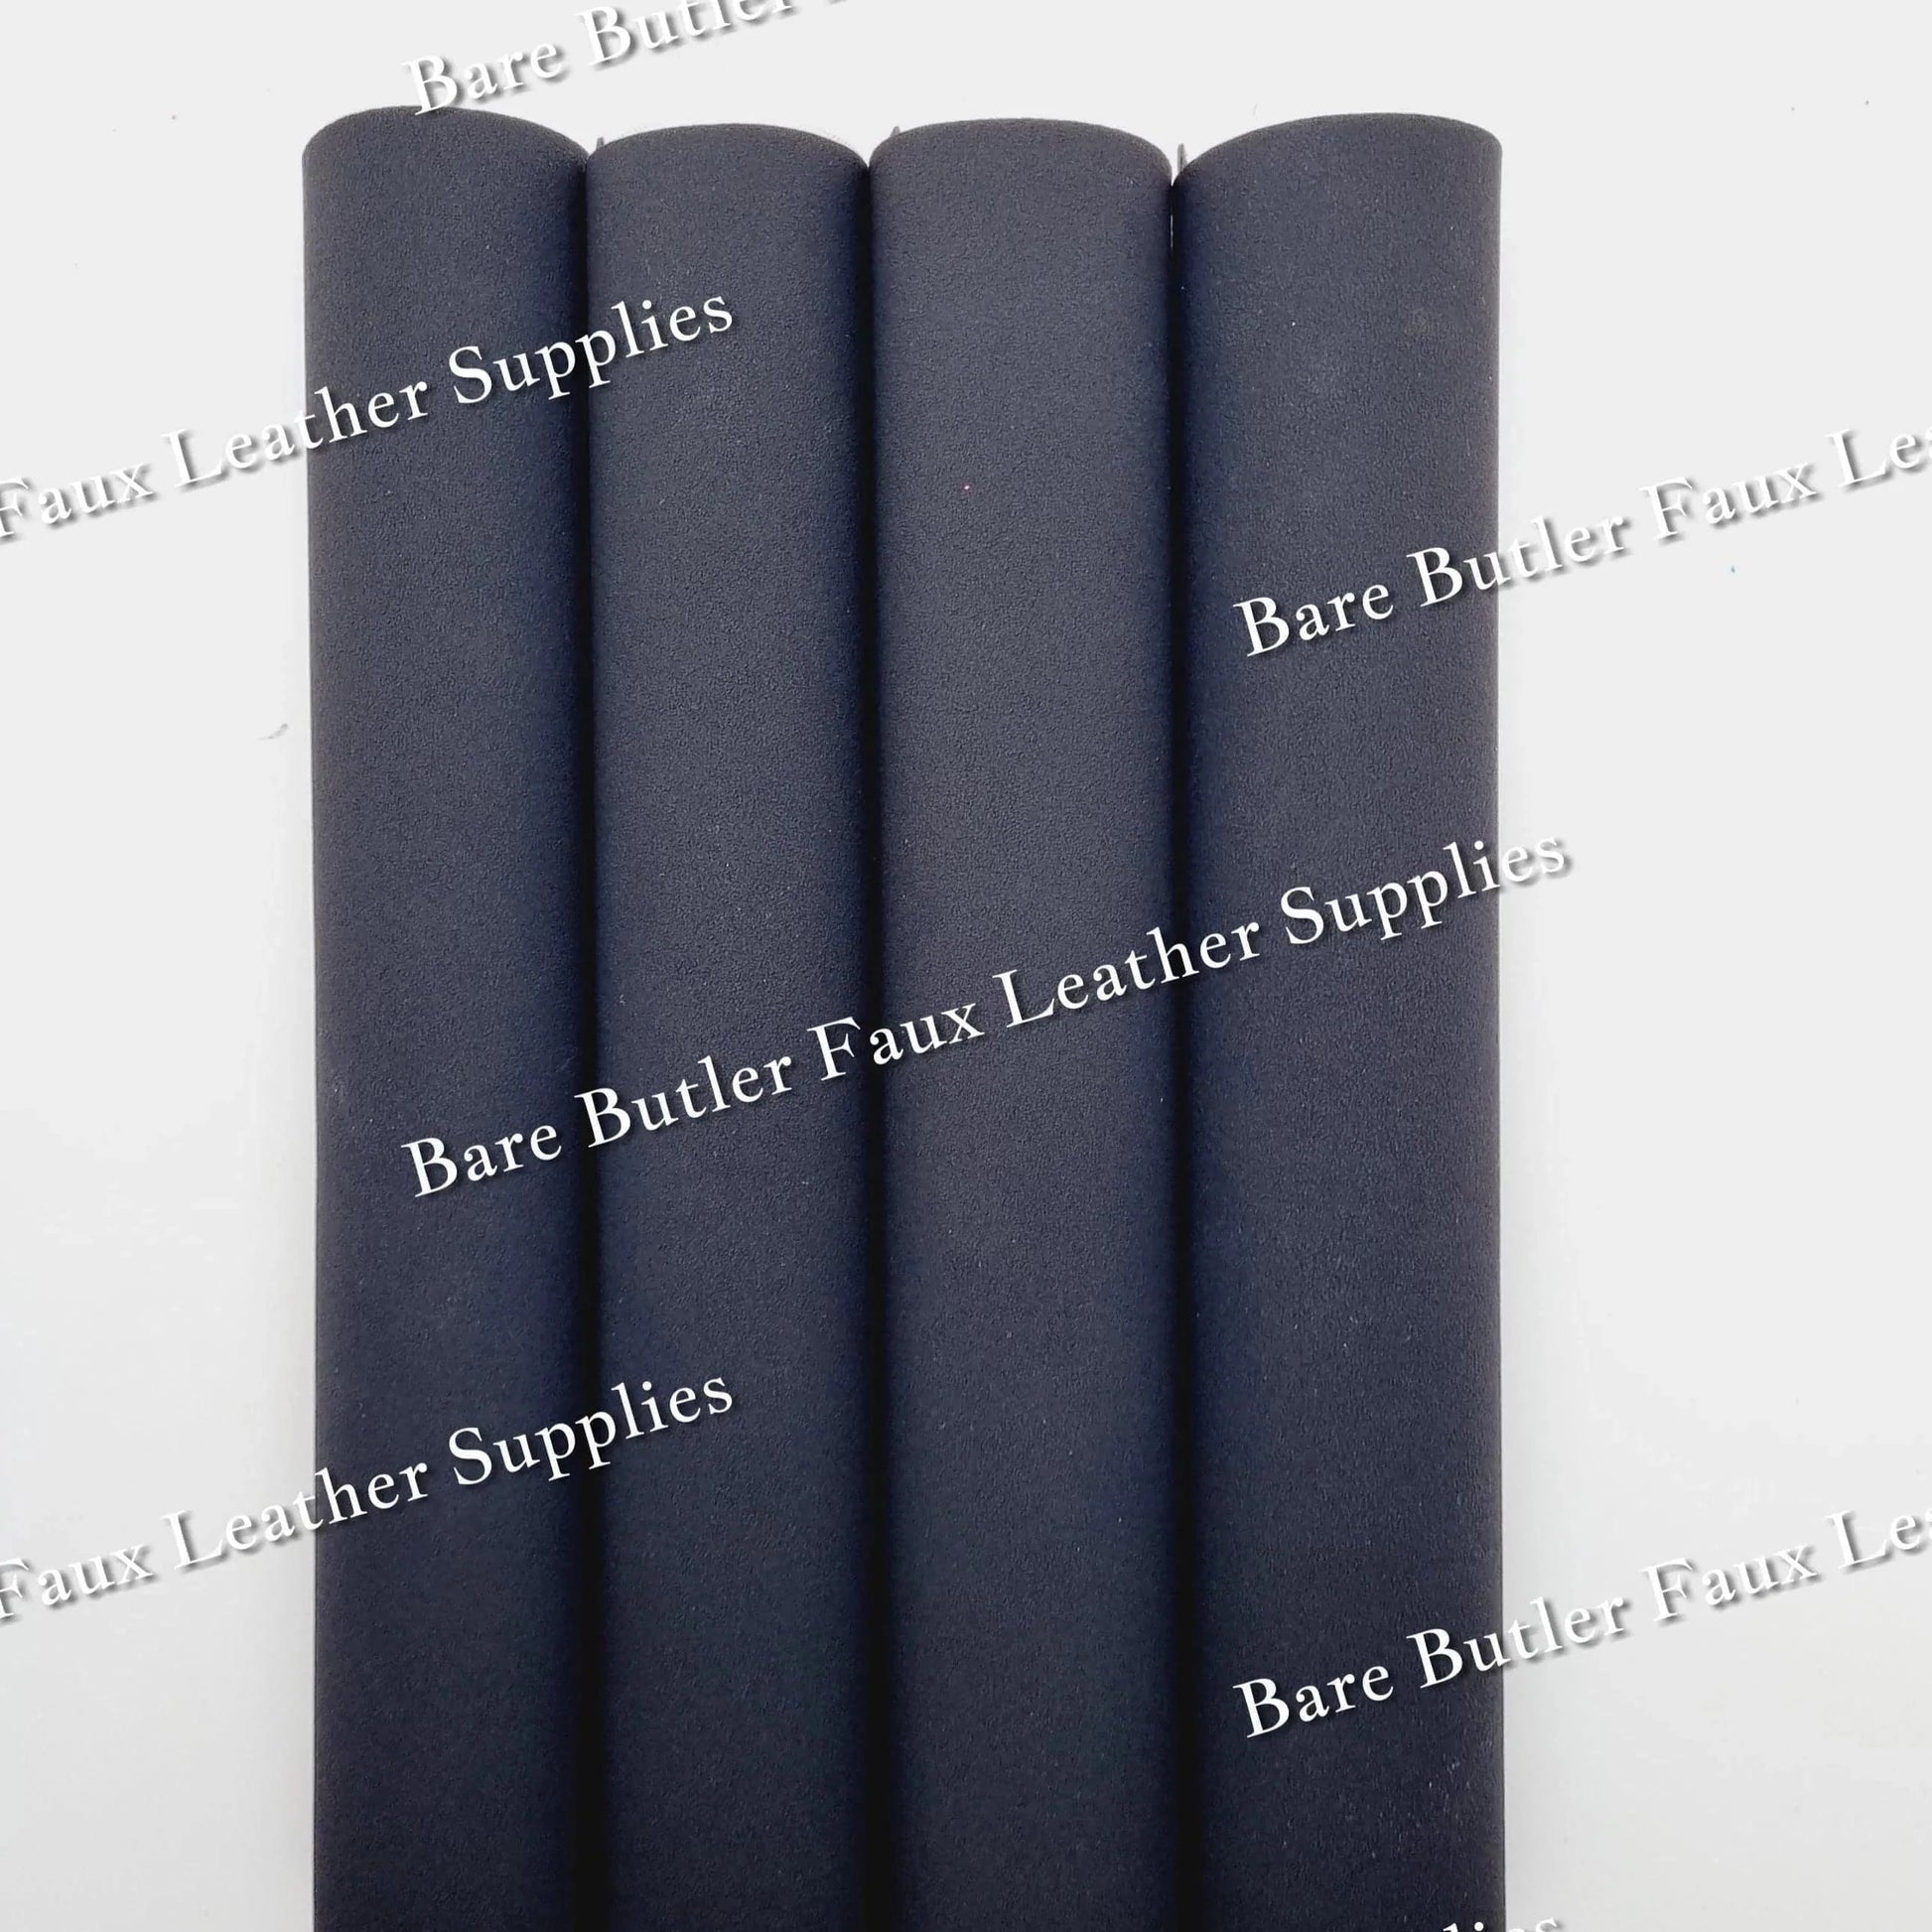 Suede - Black - Faux, Faux Leather, Suede - Bare Butler Faux Leather Supplies 